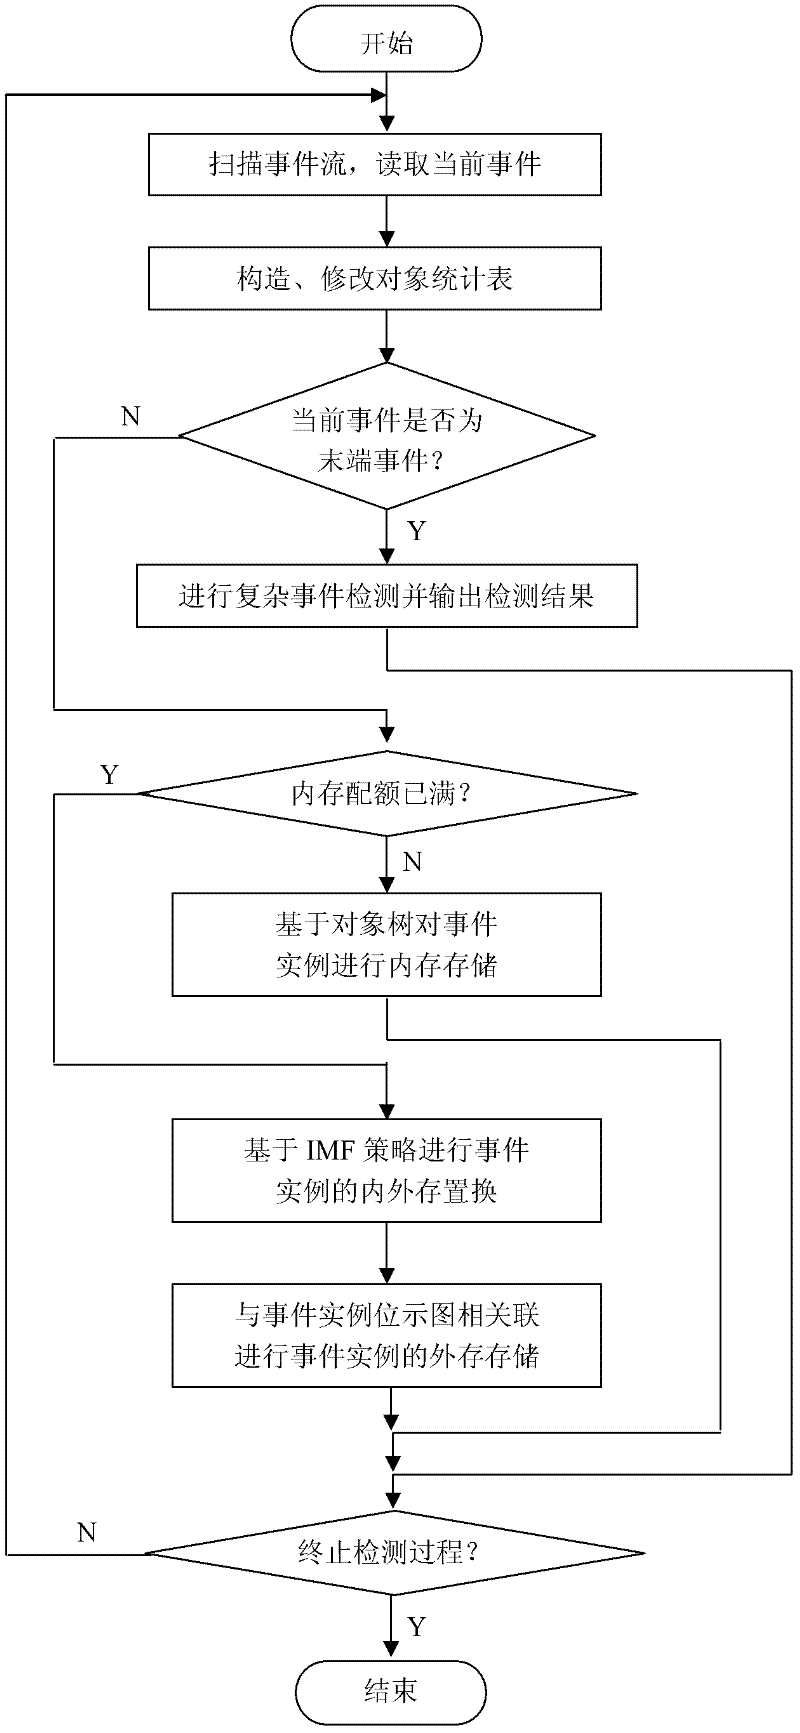 Complex event detection method on basis of IMF (instance matching frequency) internal and external memory replacement policy